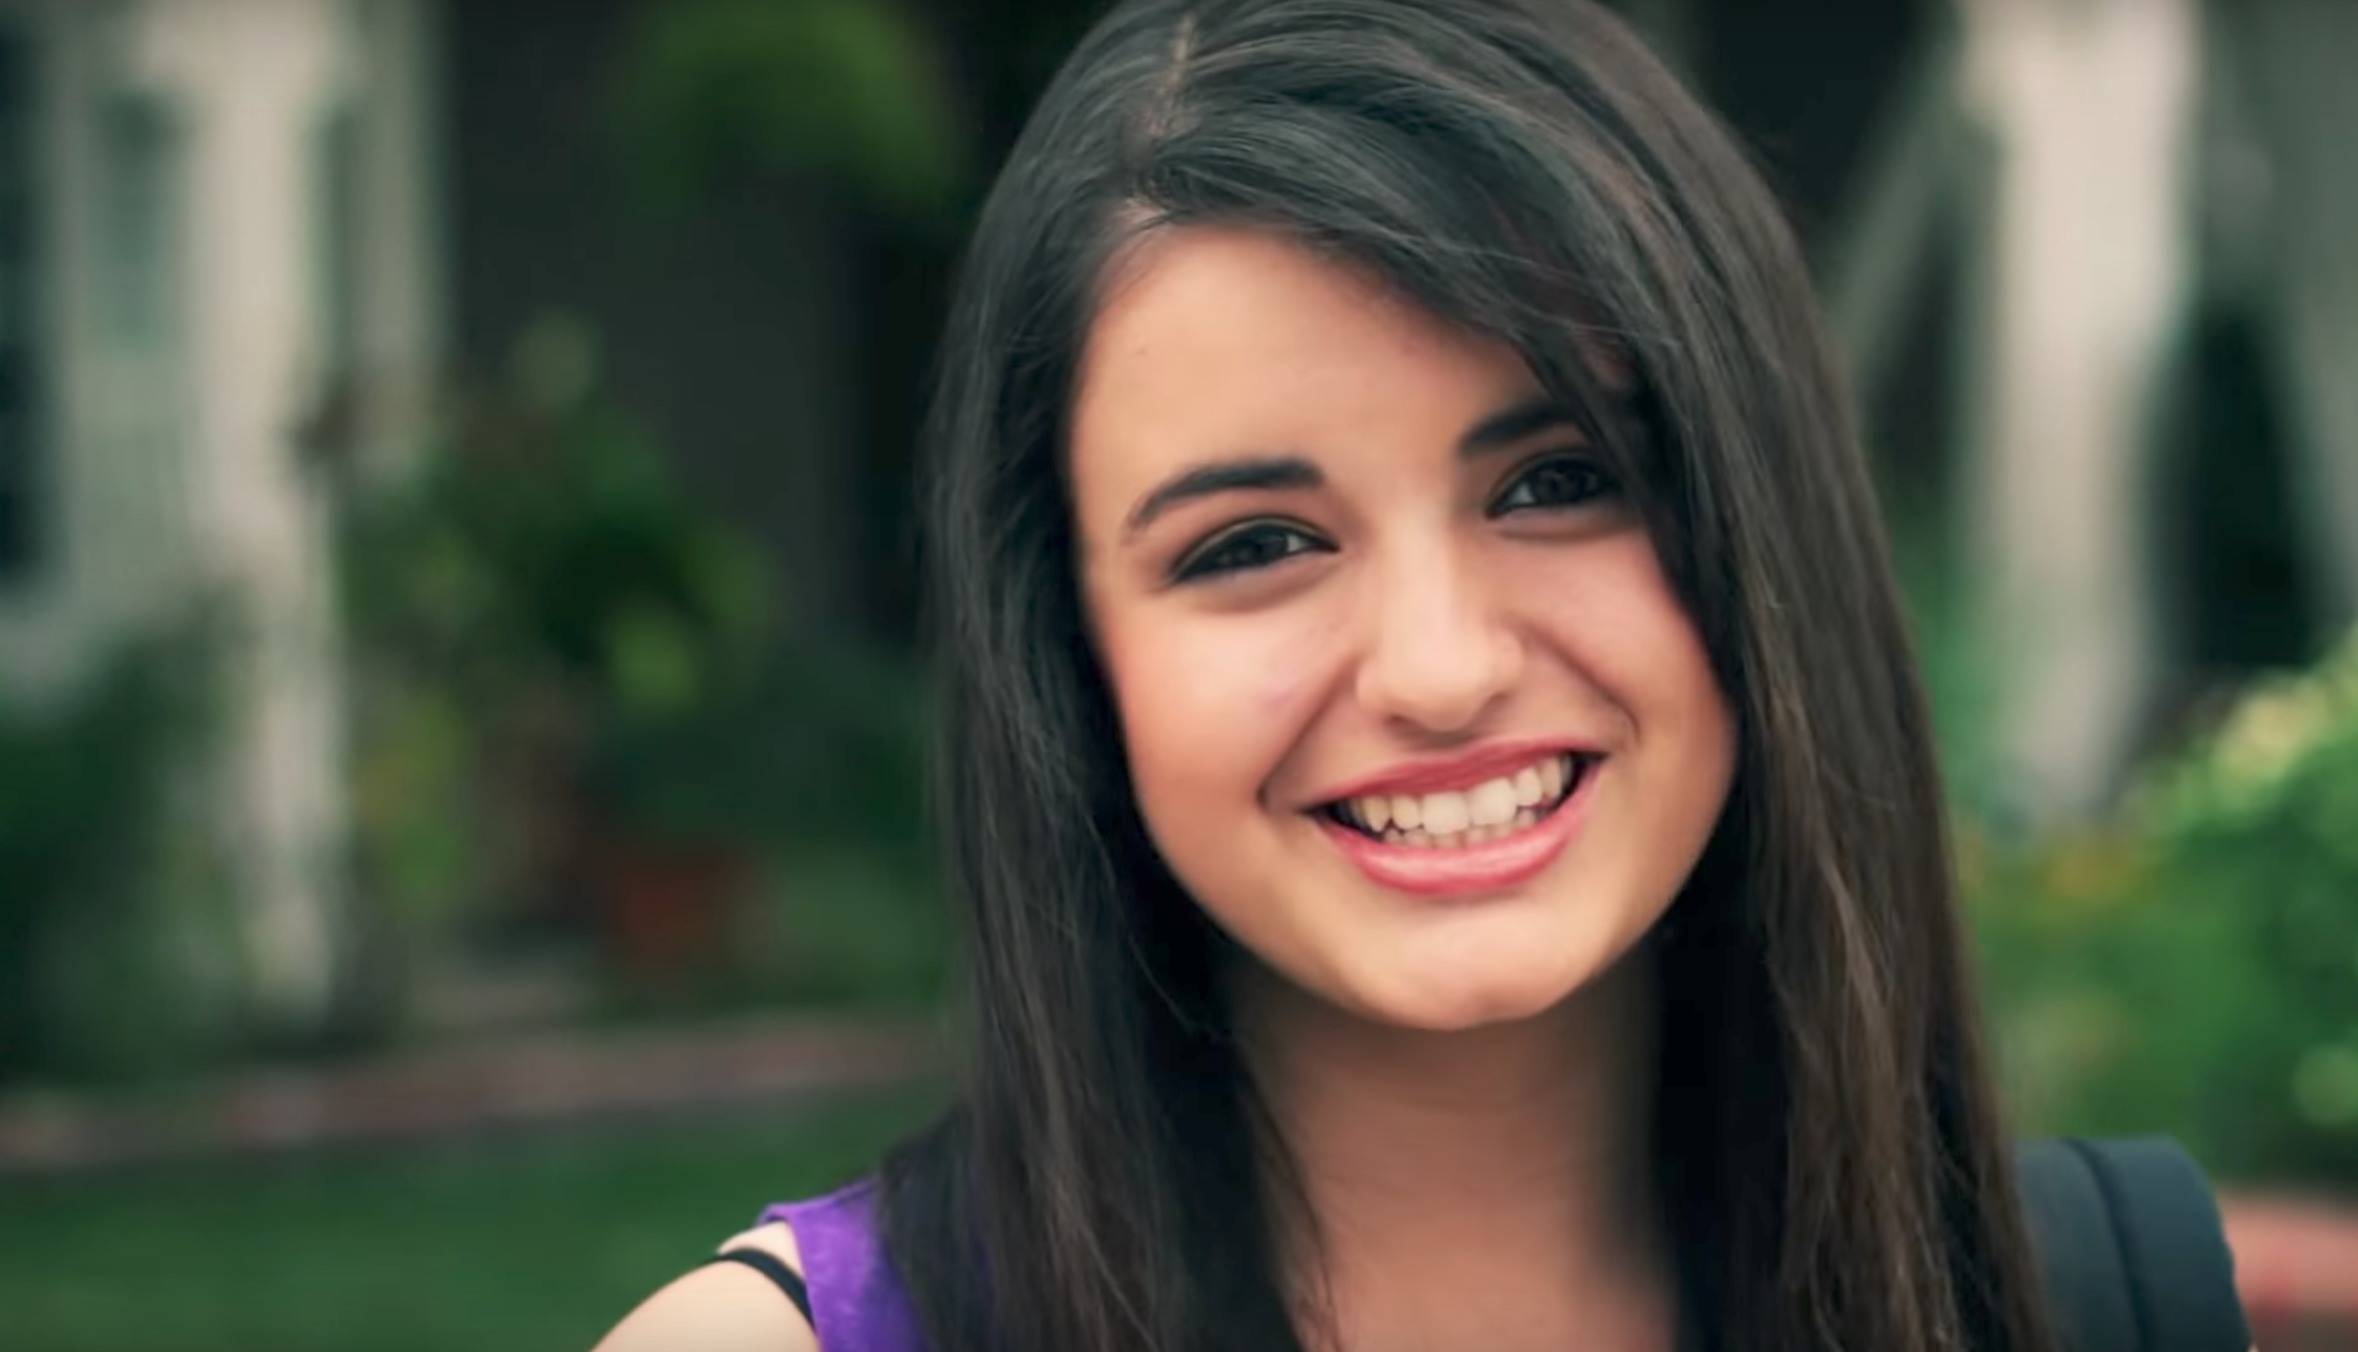 Rebecca Black 'Friday' Singer In 2021 What She's Up to Now